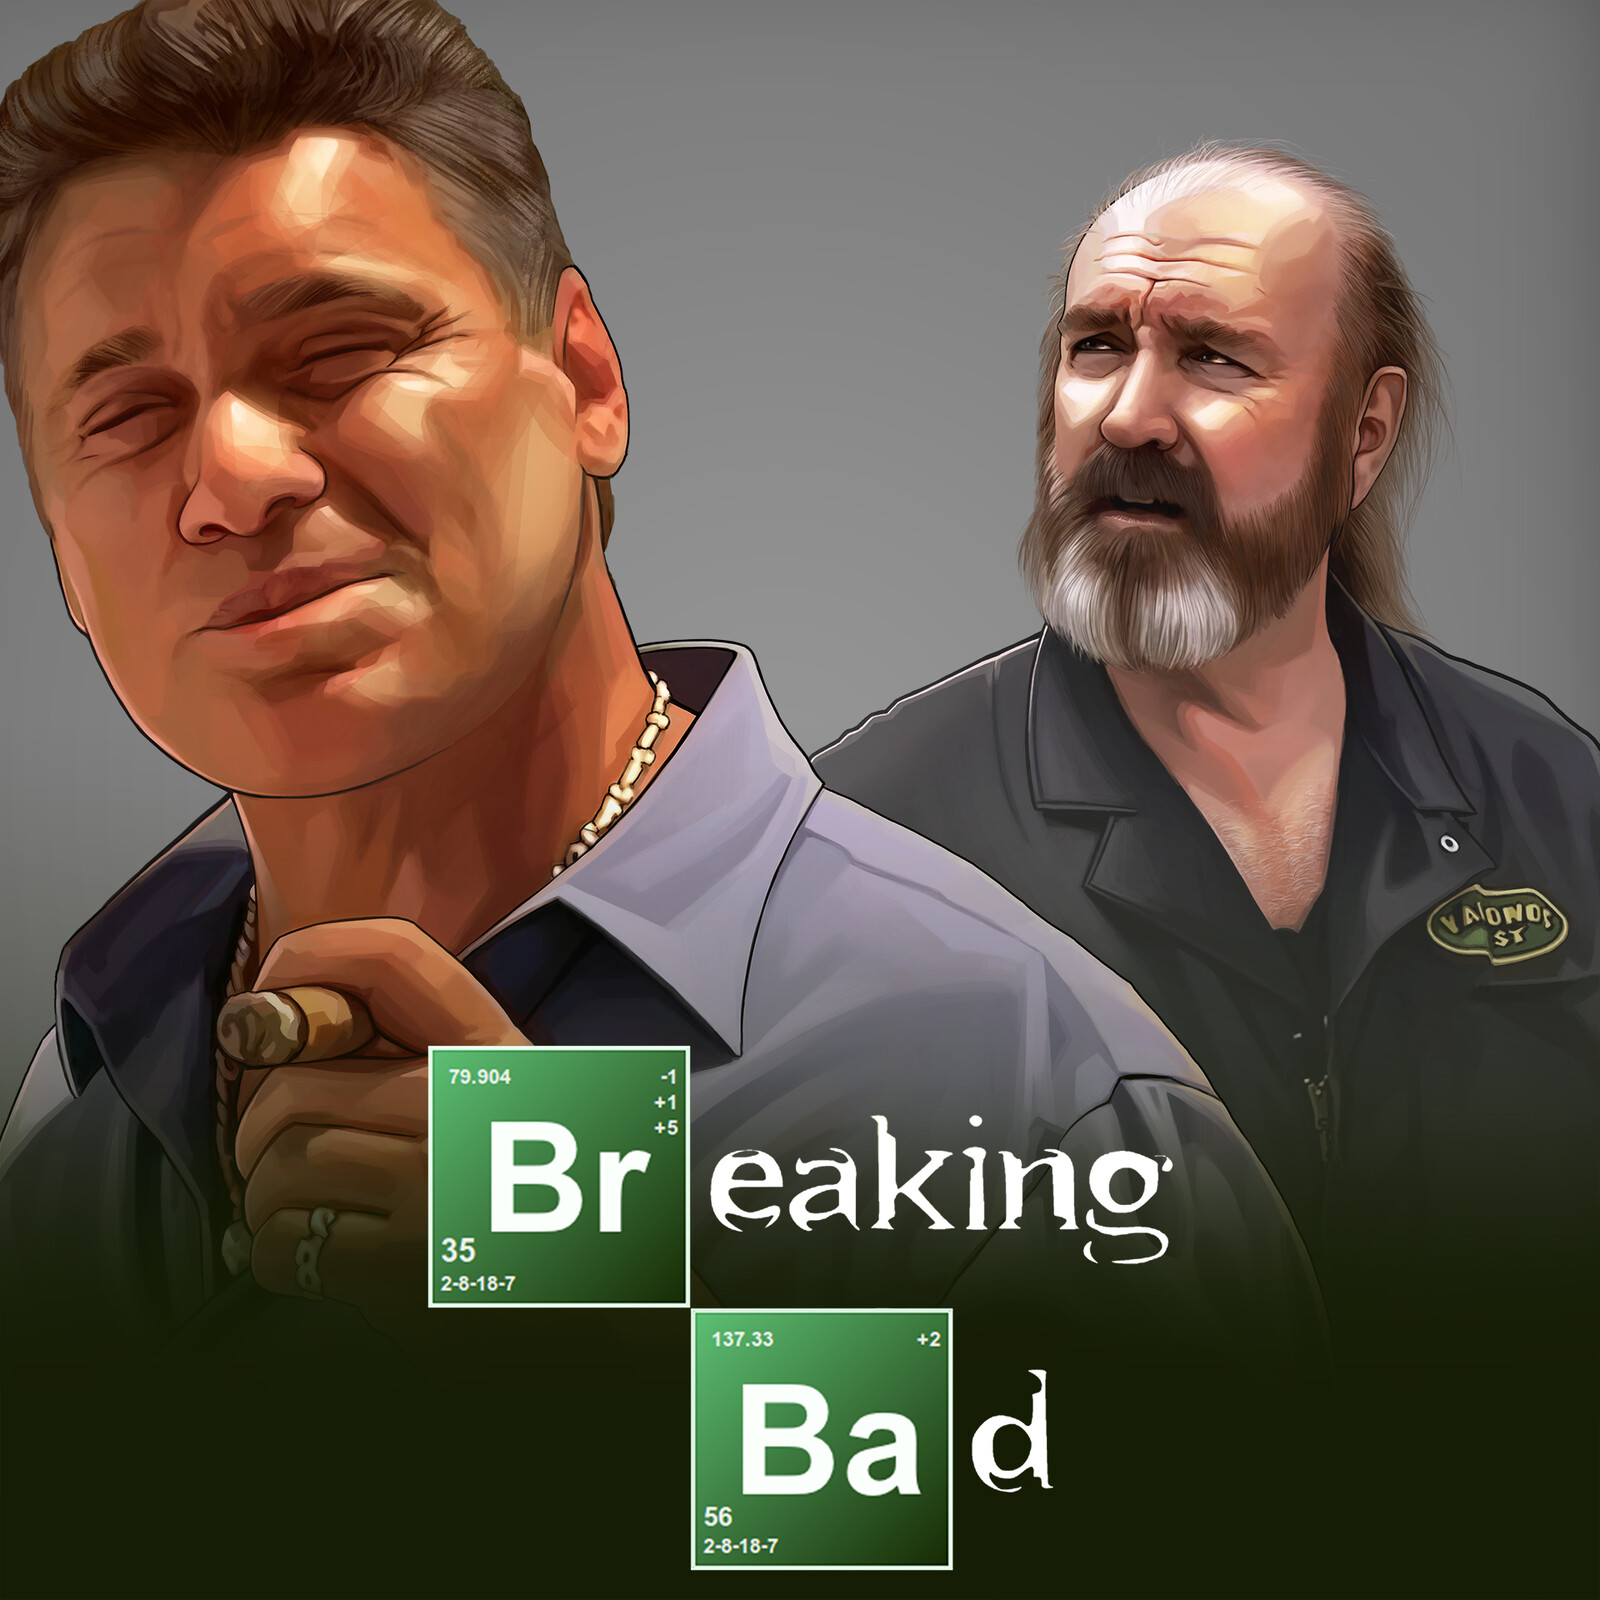 Breaking bad - Empire business